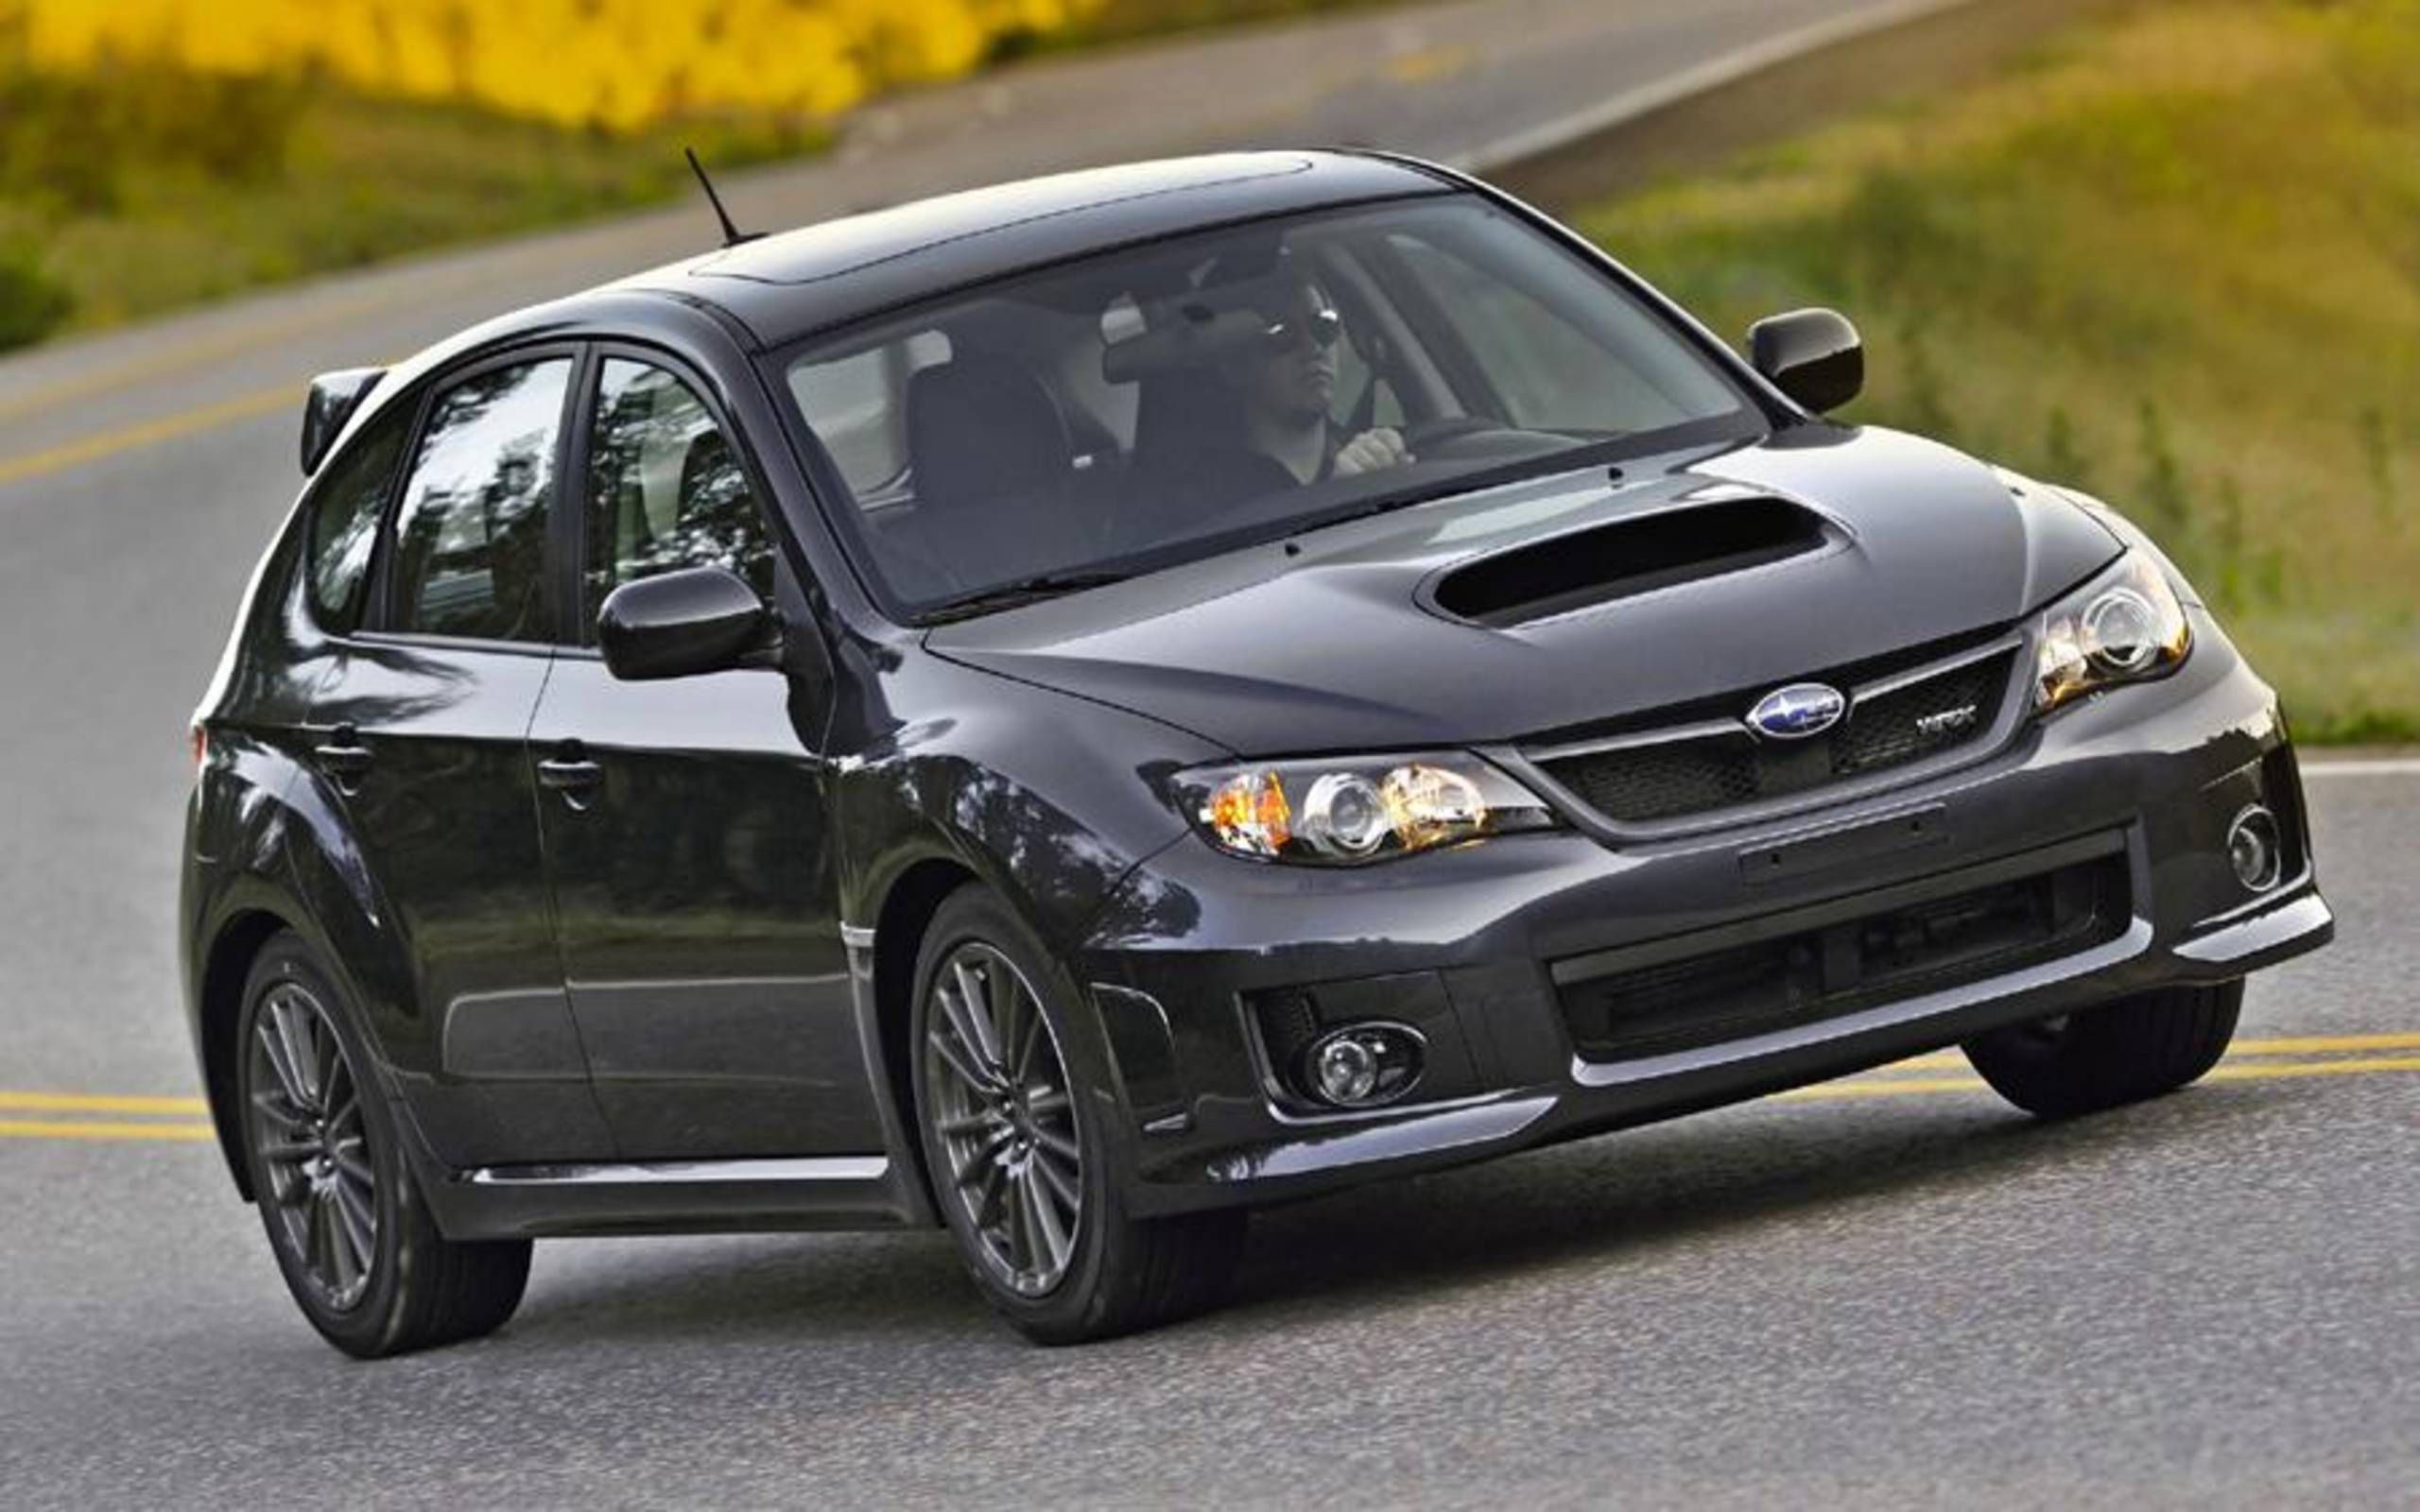 2012 Subaru Impreza WRX 5-Door review notes: Affordable and practical  performance